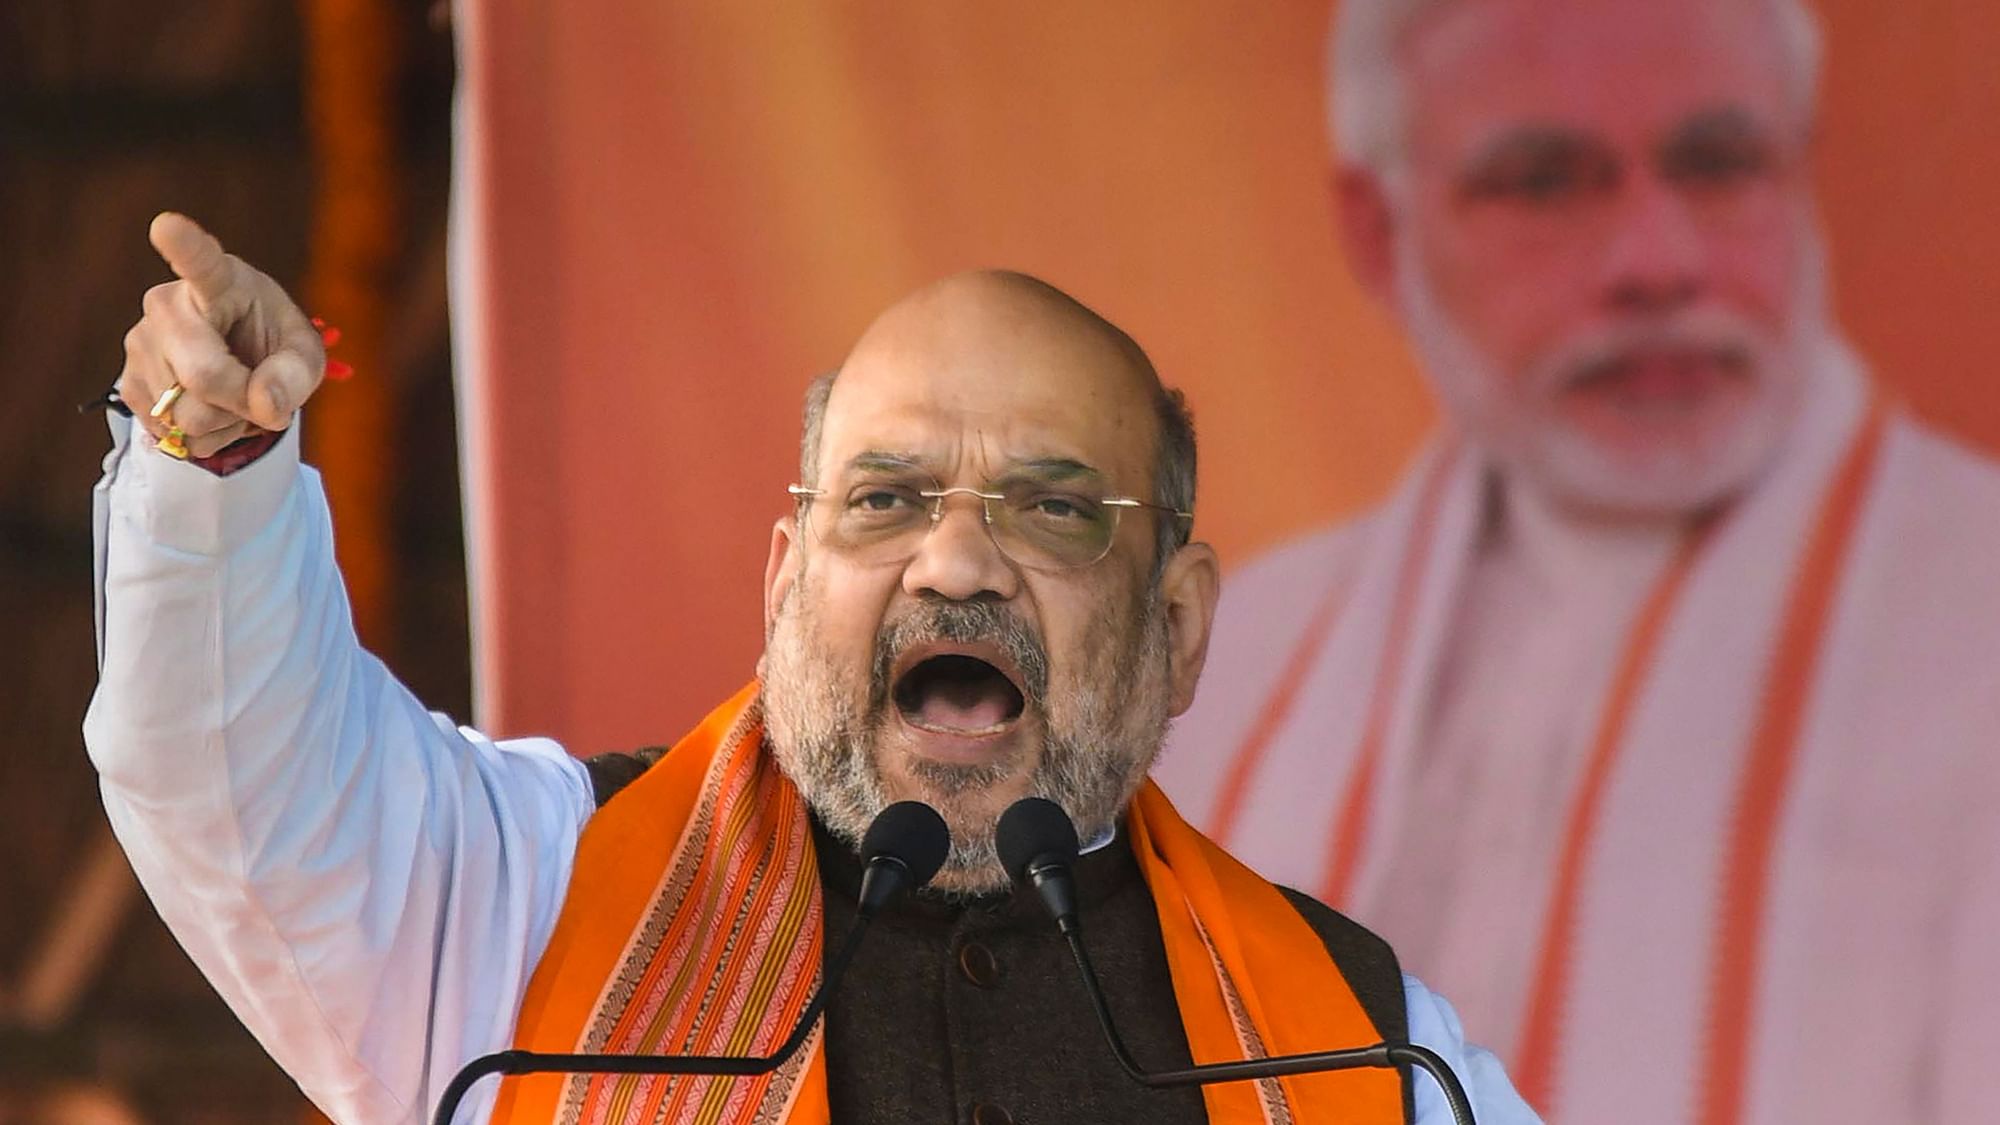 Shah sought support of the people for the  Modi government’s moves like CAA, abrogation of Article 370 and the construction of Ram temple in Ayodhya.